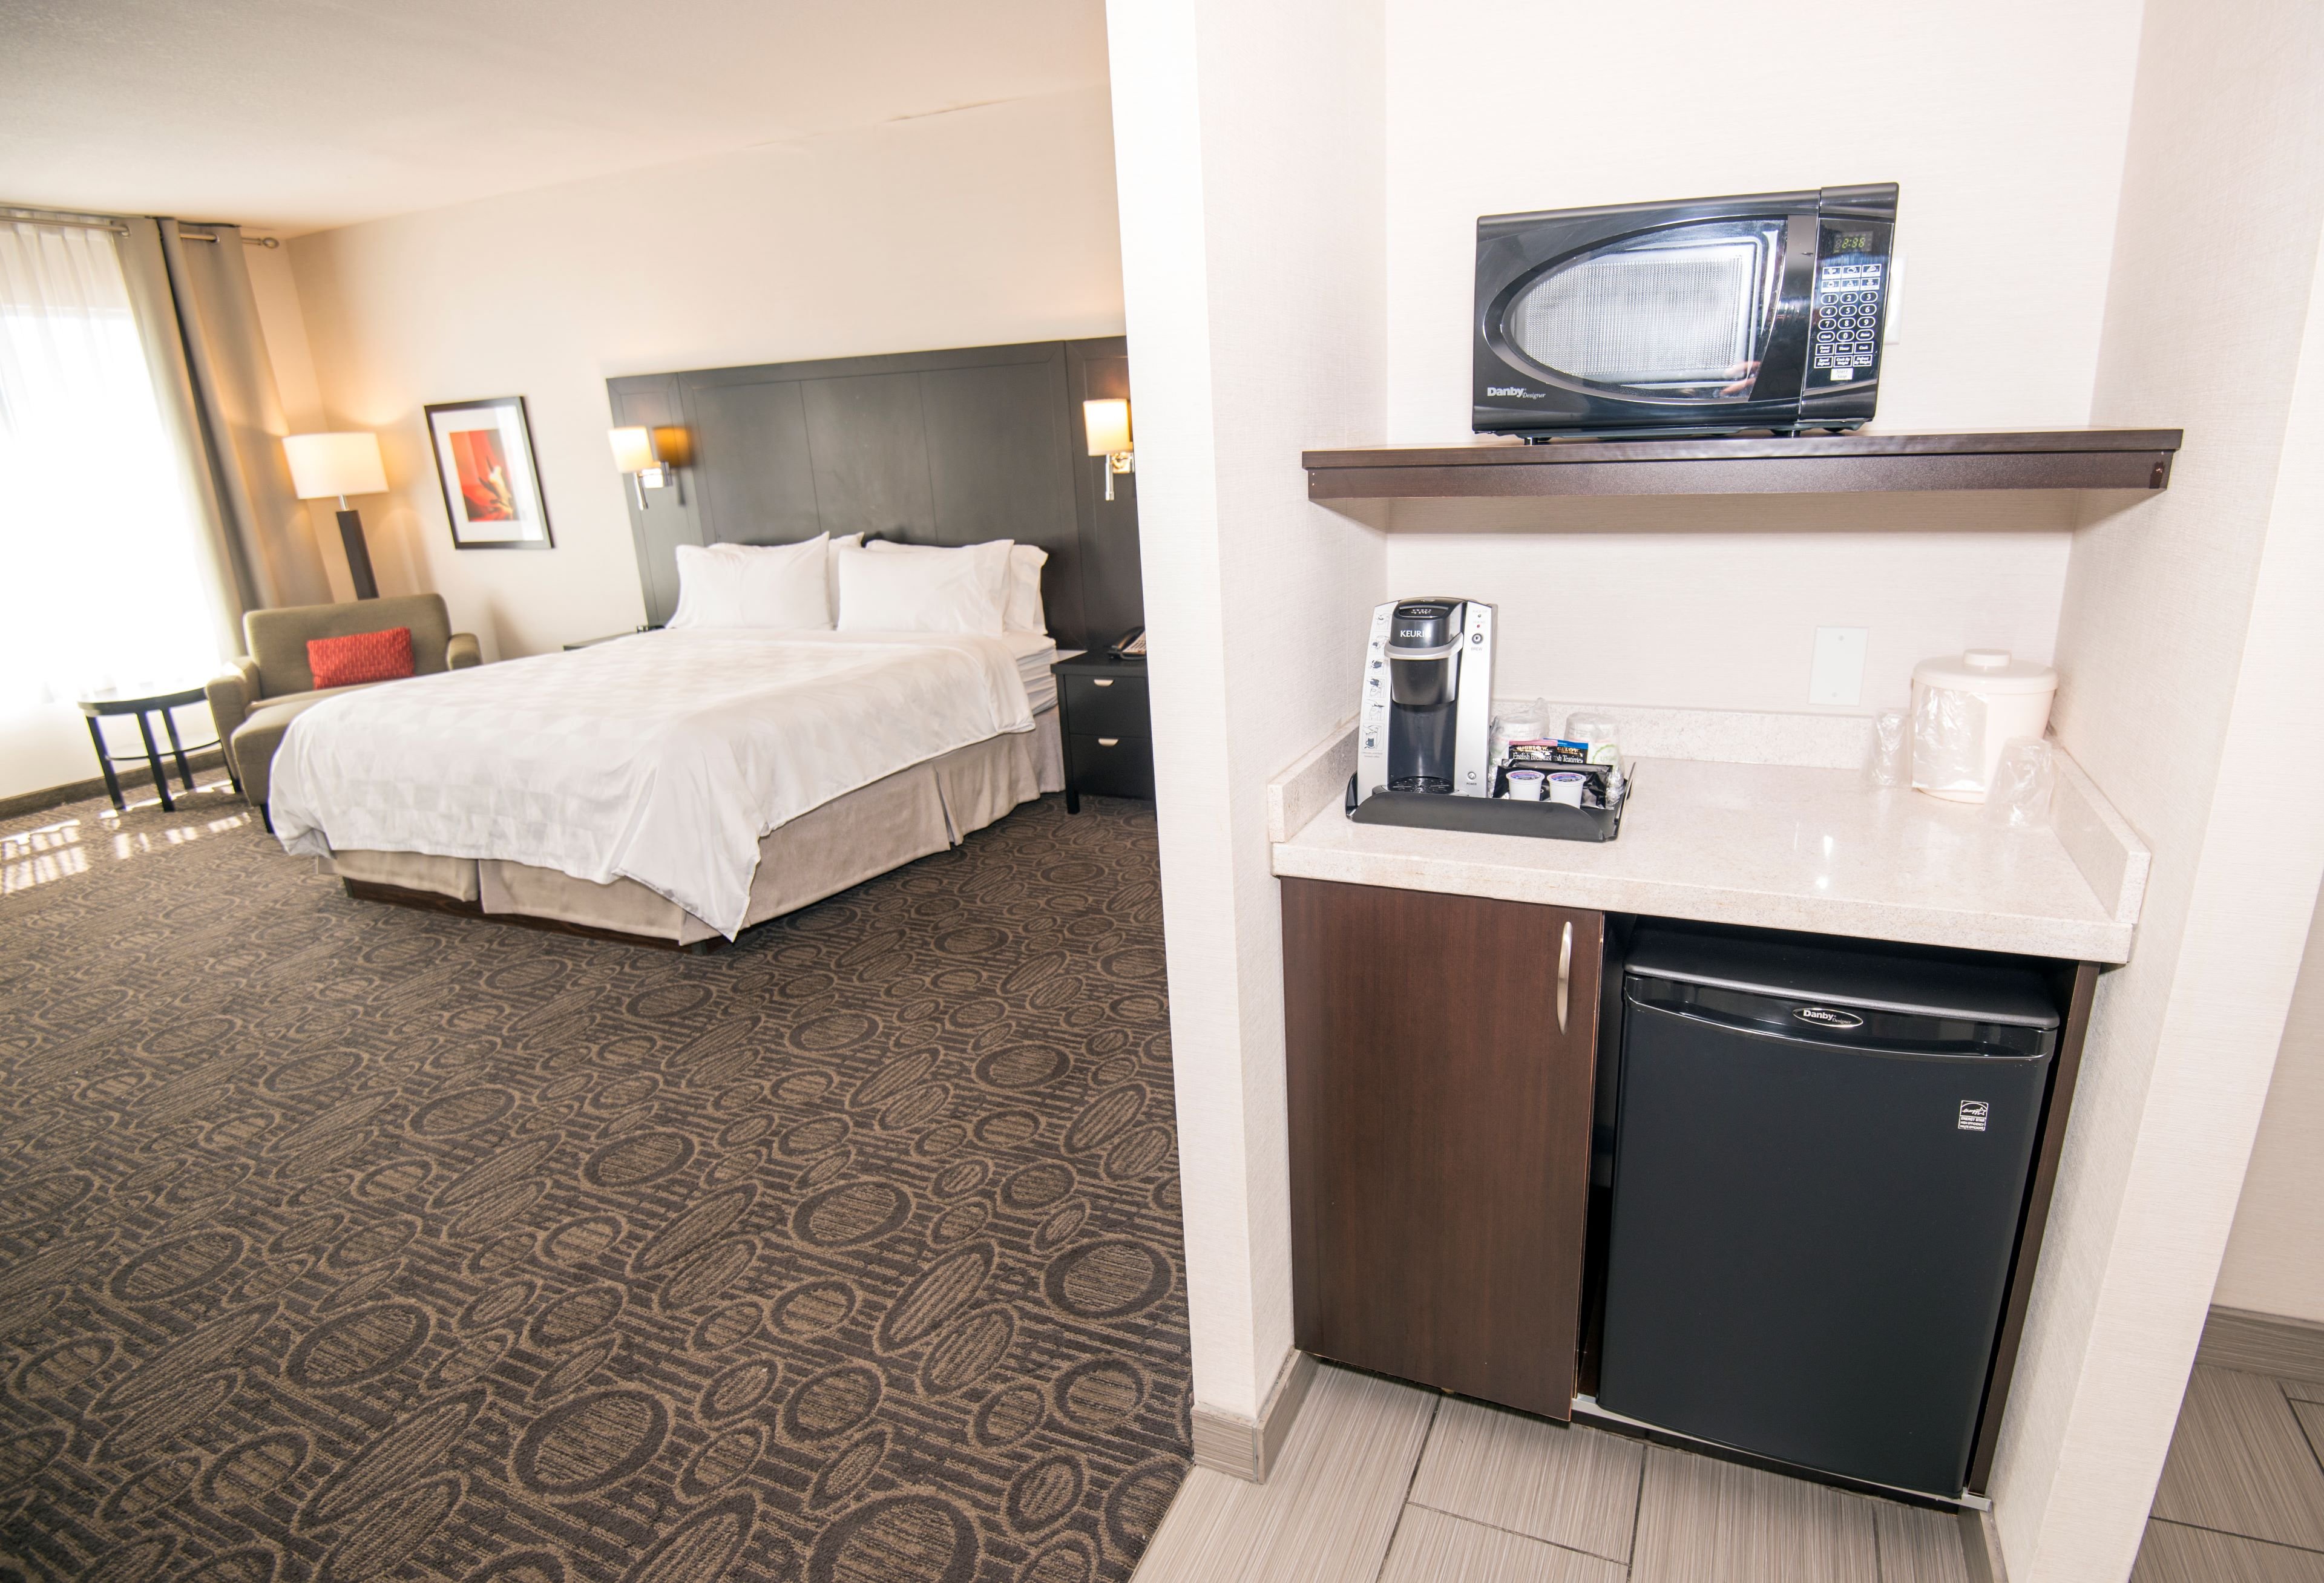 All our rooms are provide a Fridge and Microwave